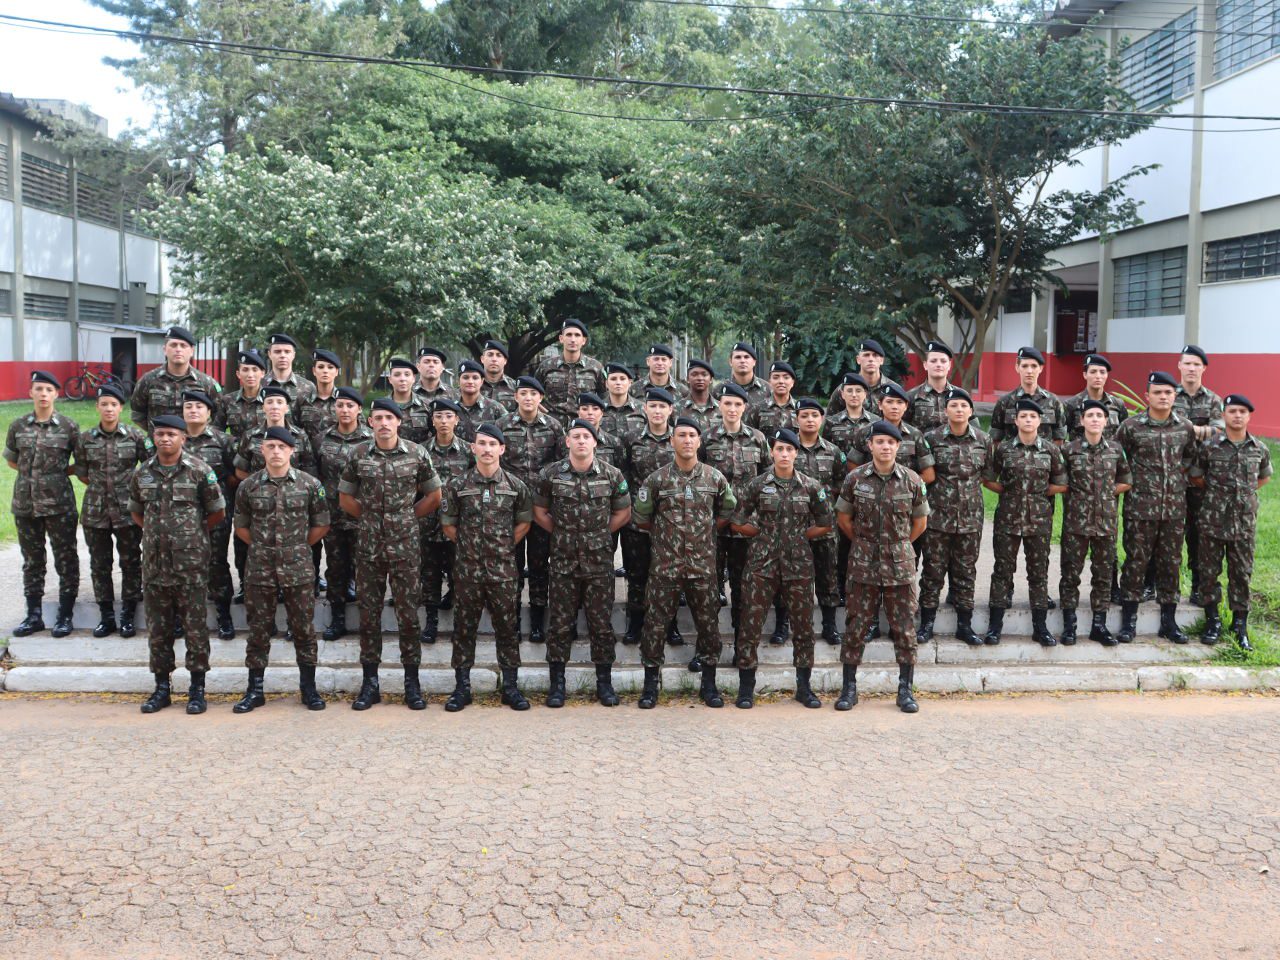 Temporary sergeants ready to serve in southern Brazil